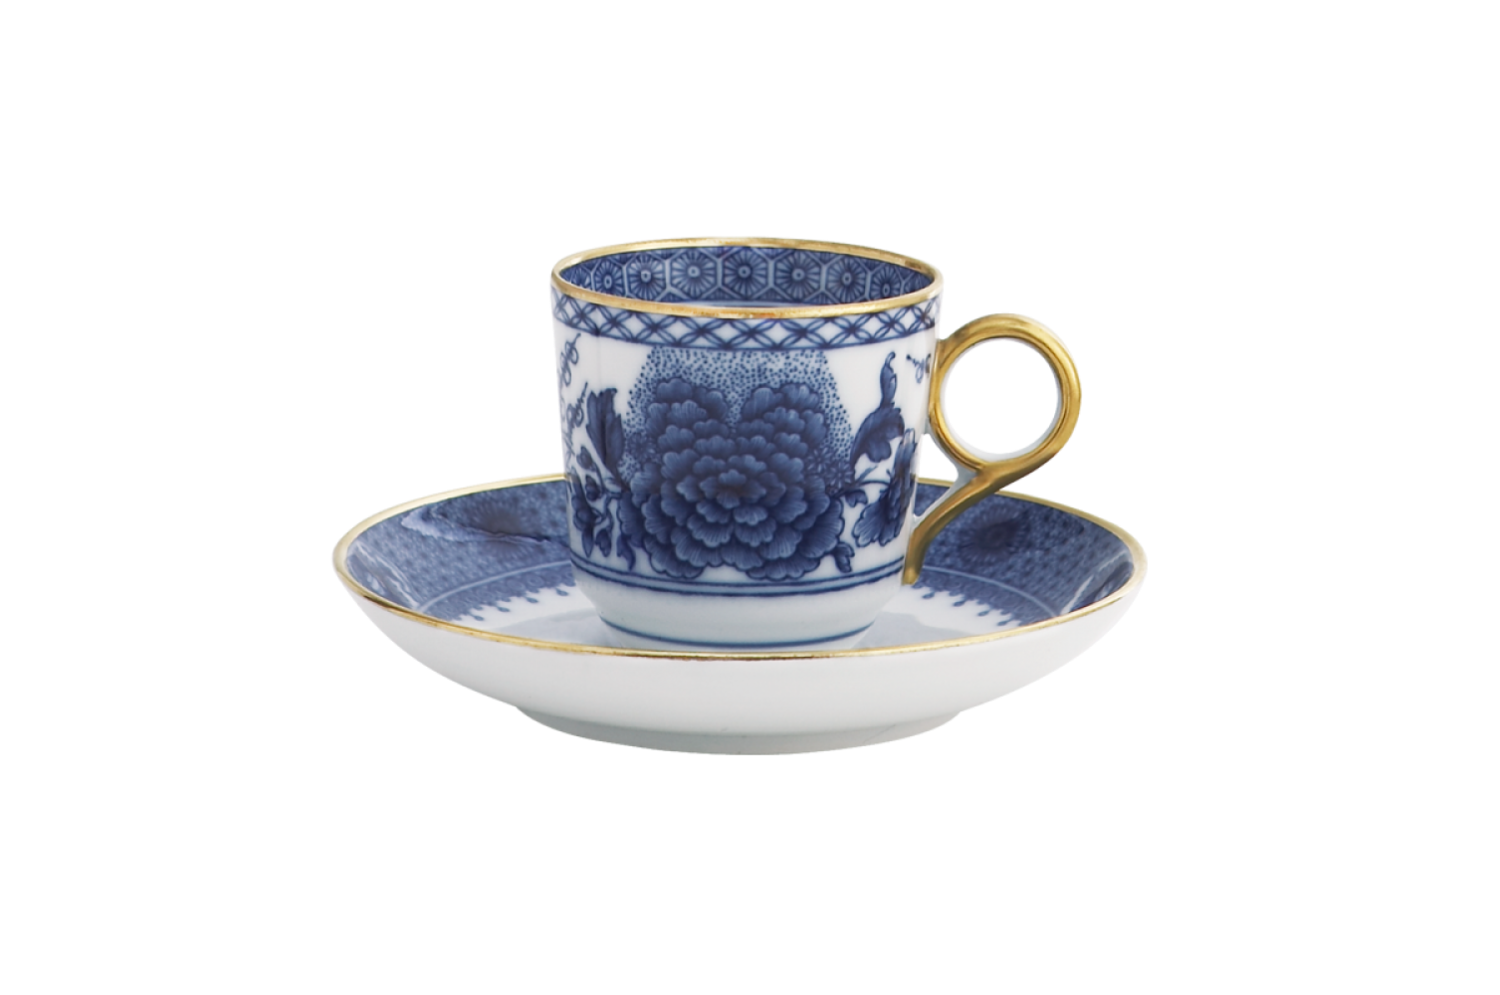 Imperial Blue Demi Cup & Saucer